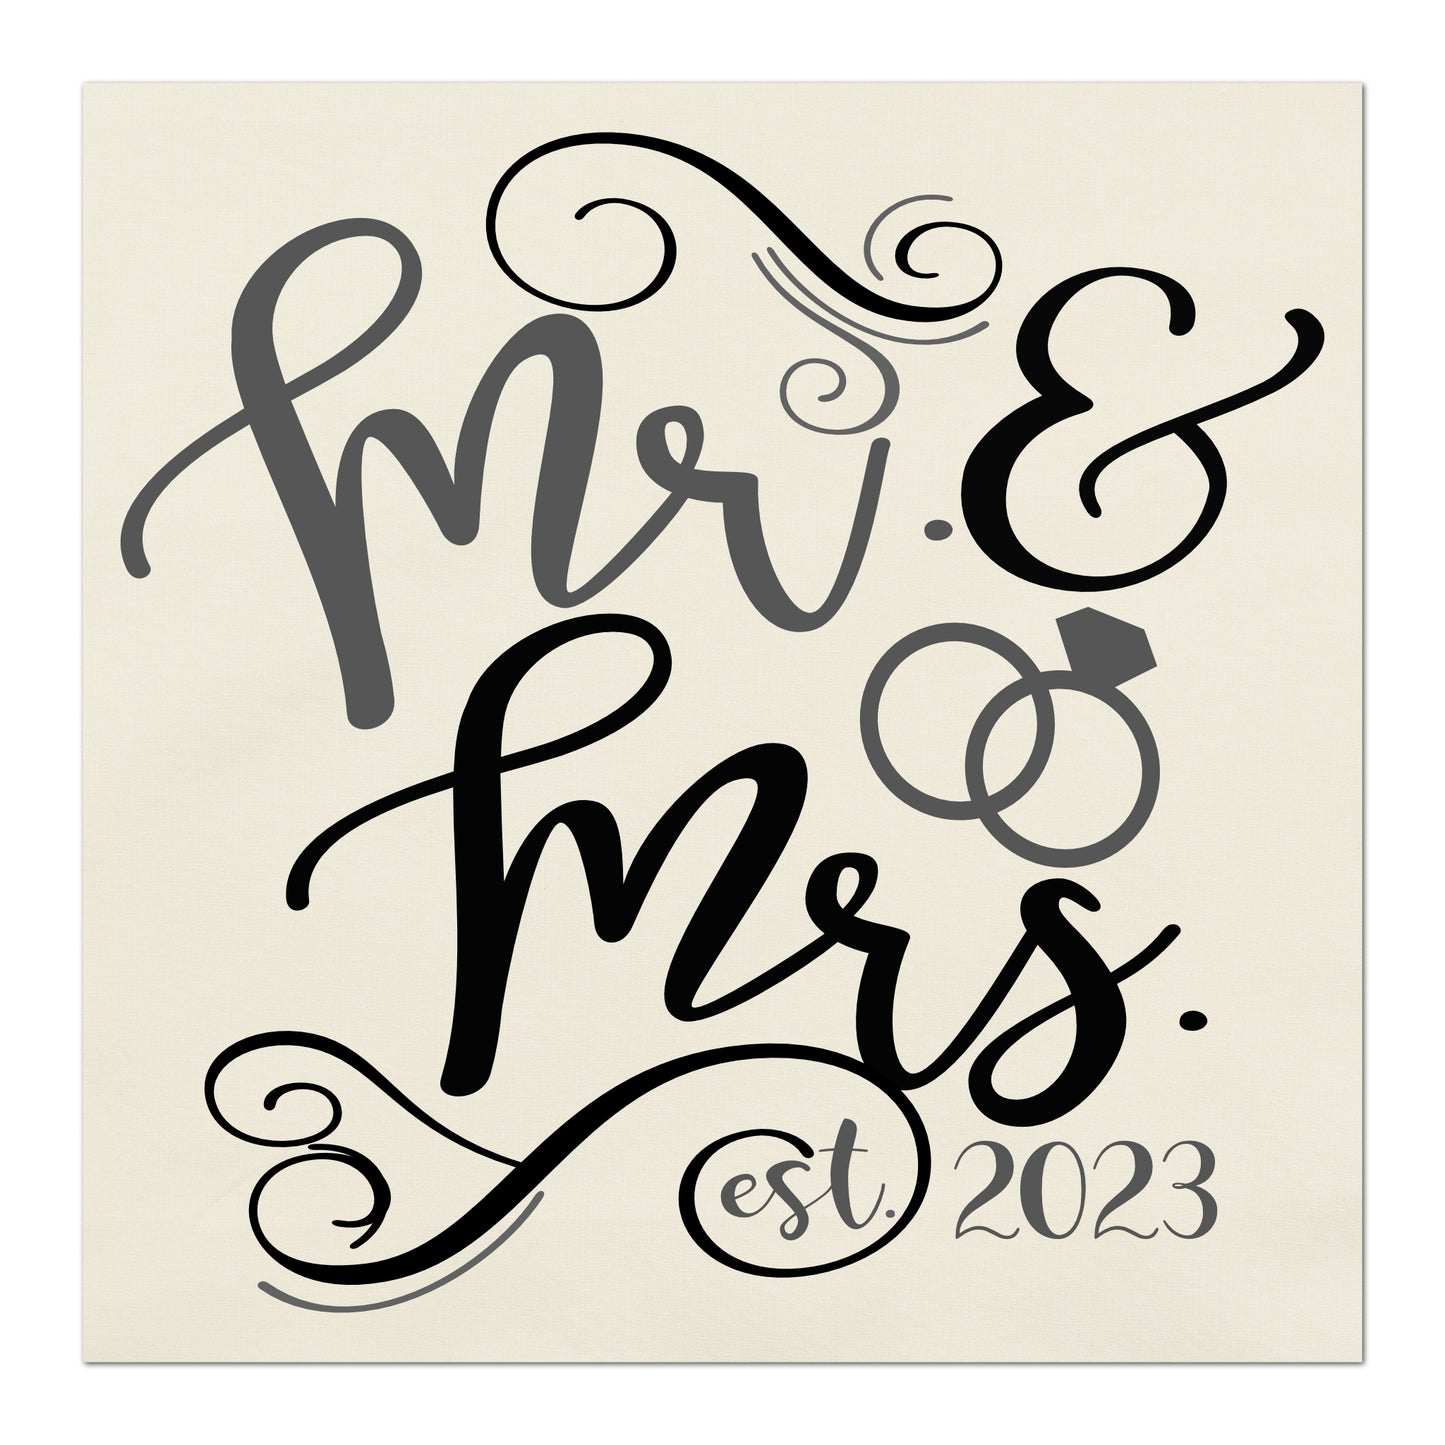 Mr. & Mrs. - Personalized Date, Custom Fabric Panel Print - Wedding, Engagement, Moving In Together